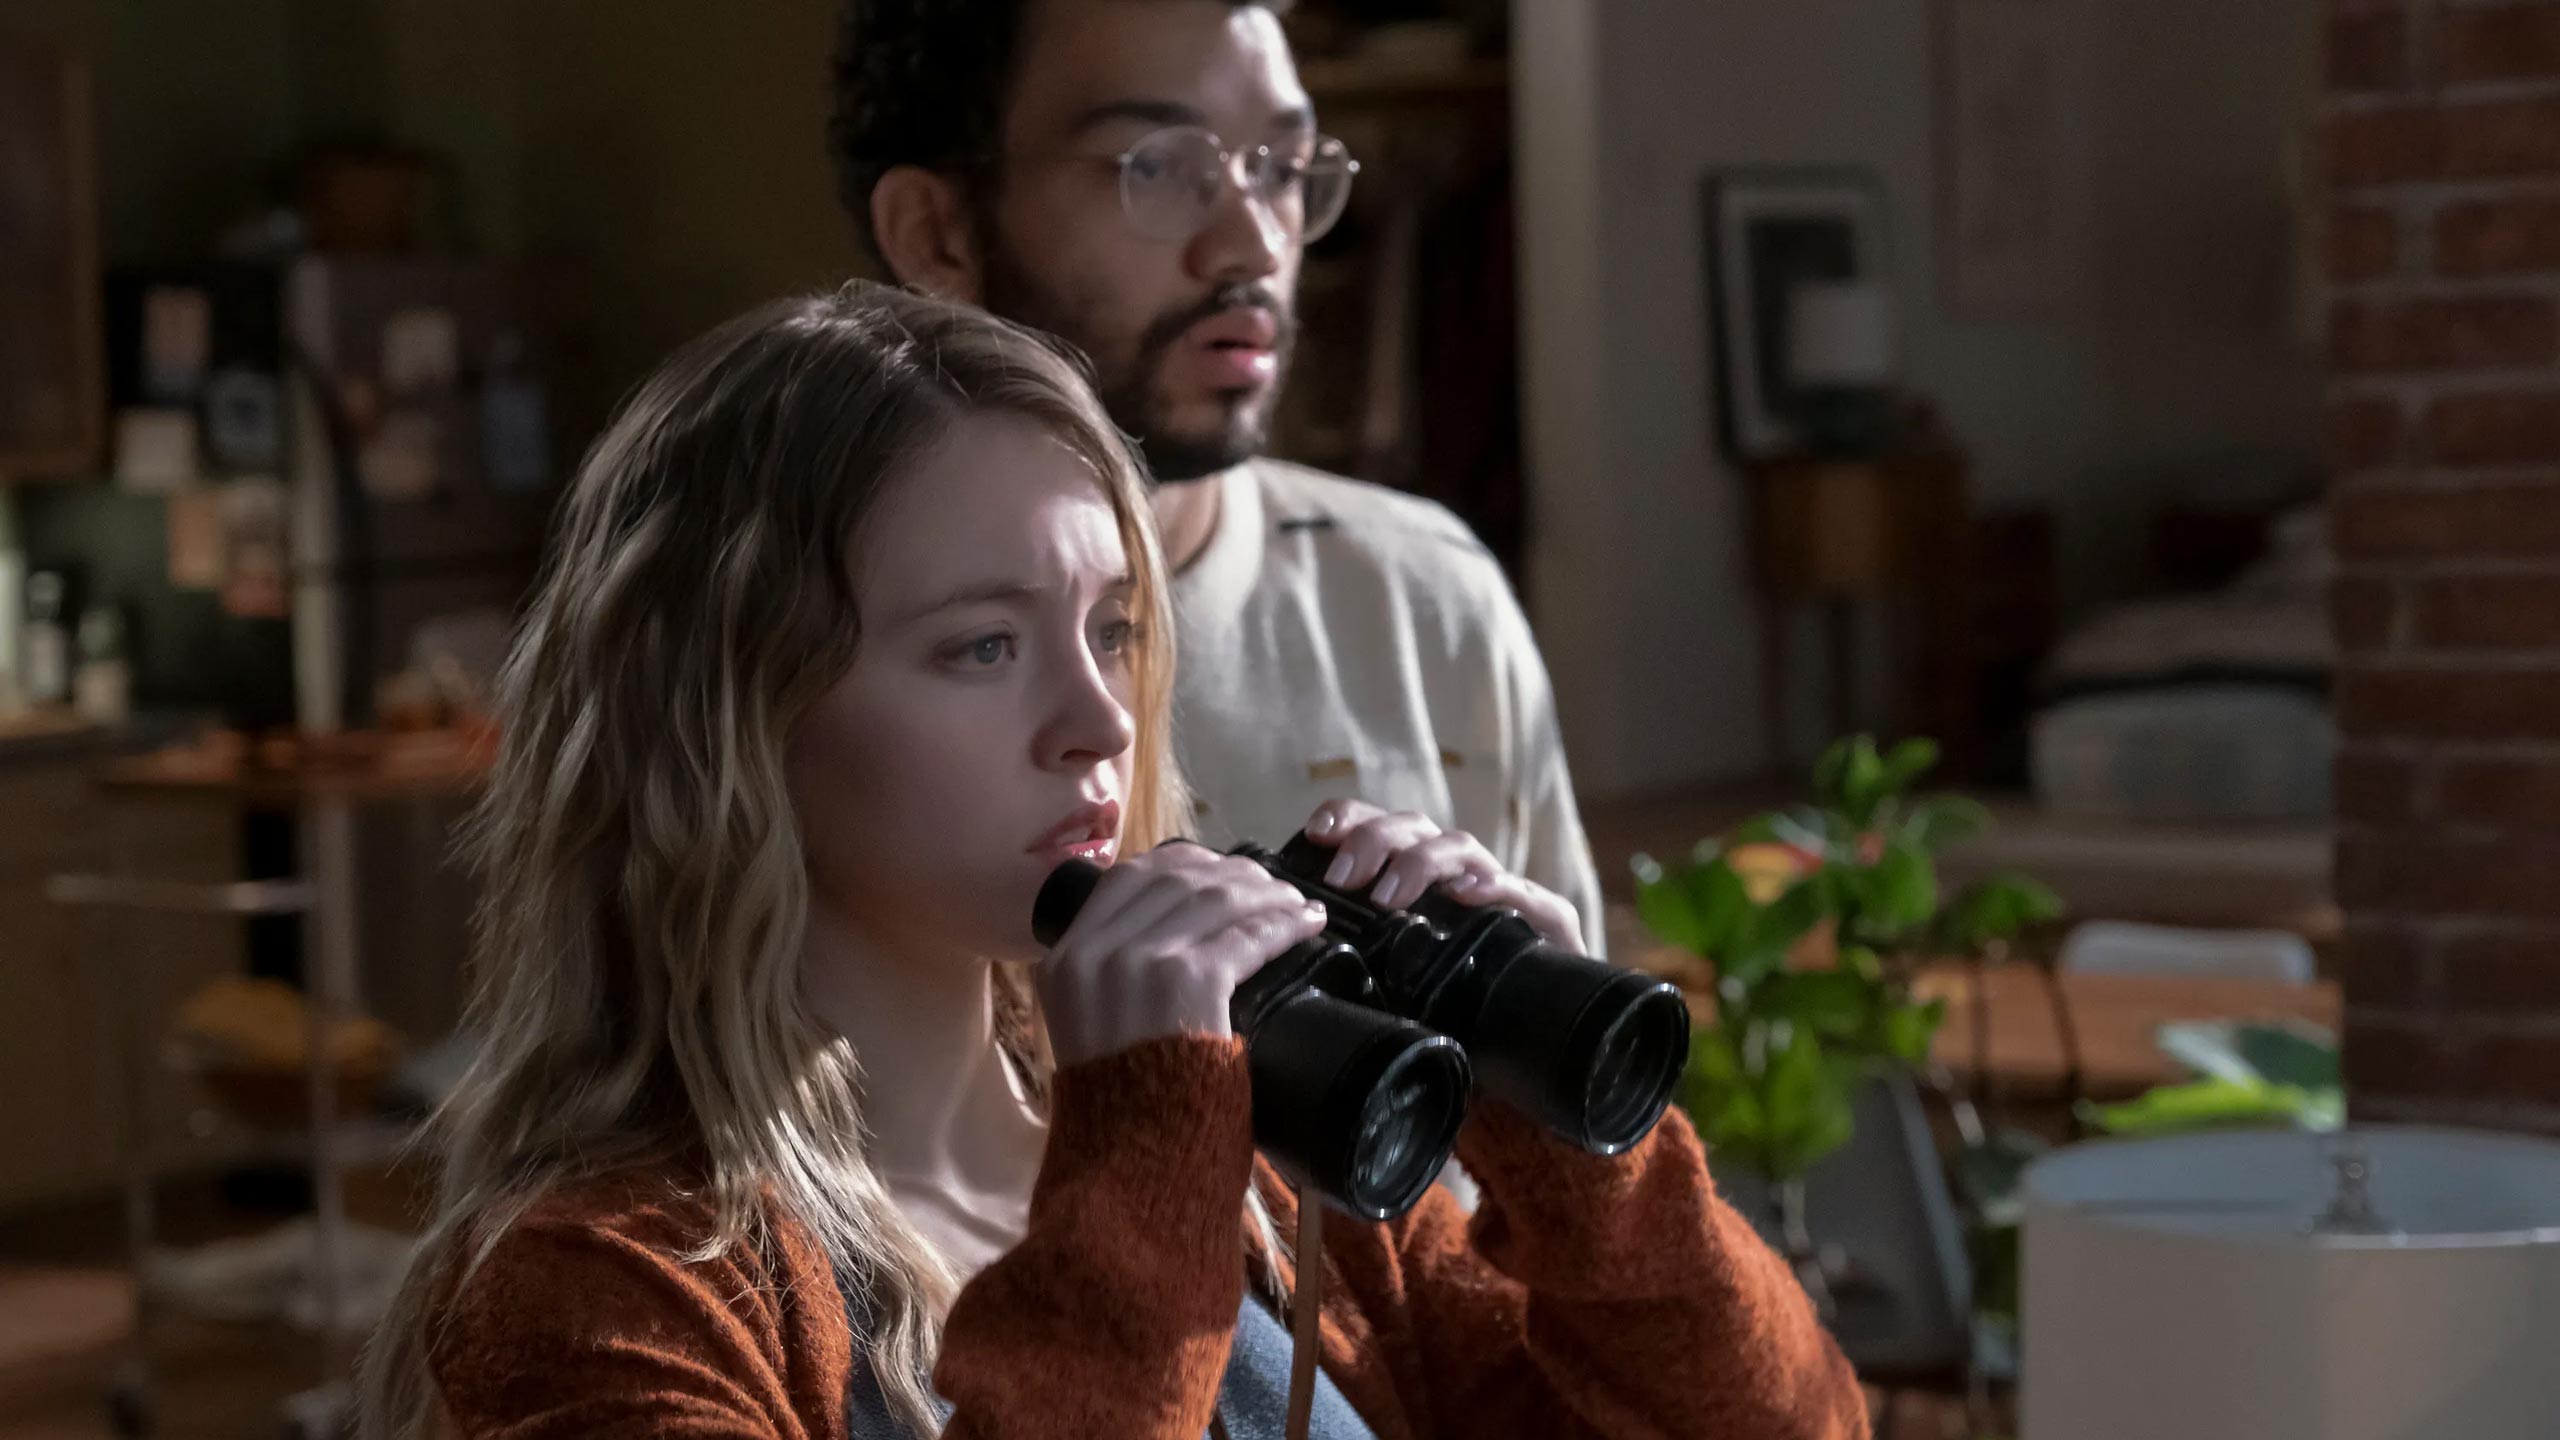 Sydney Sweeney and Justice Smith in The Voyeurs